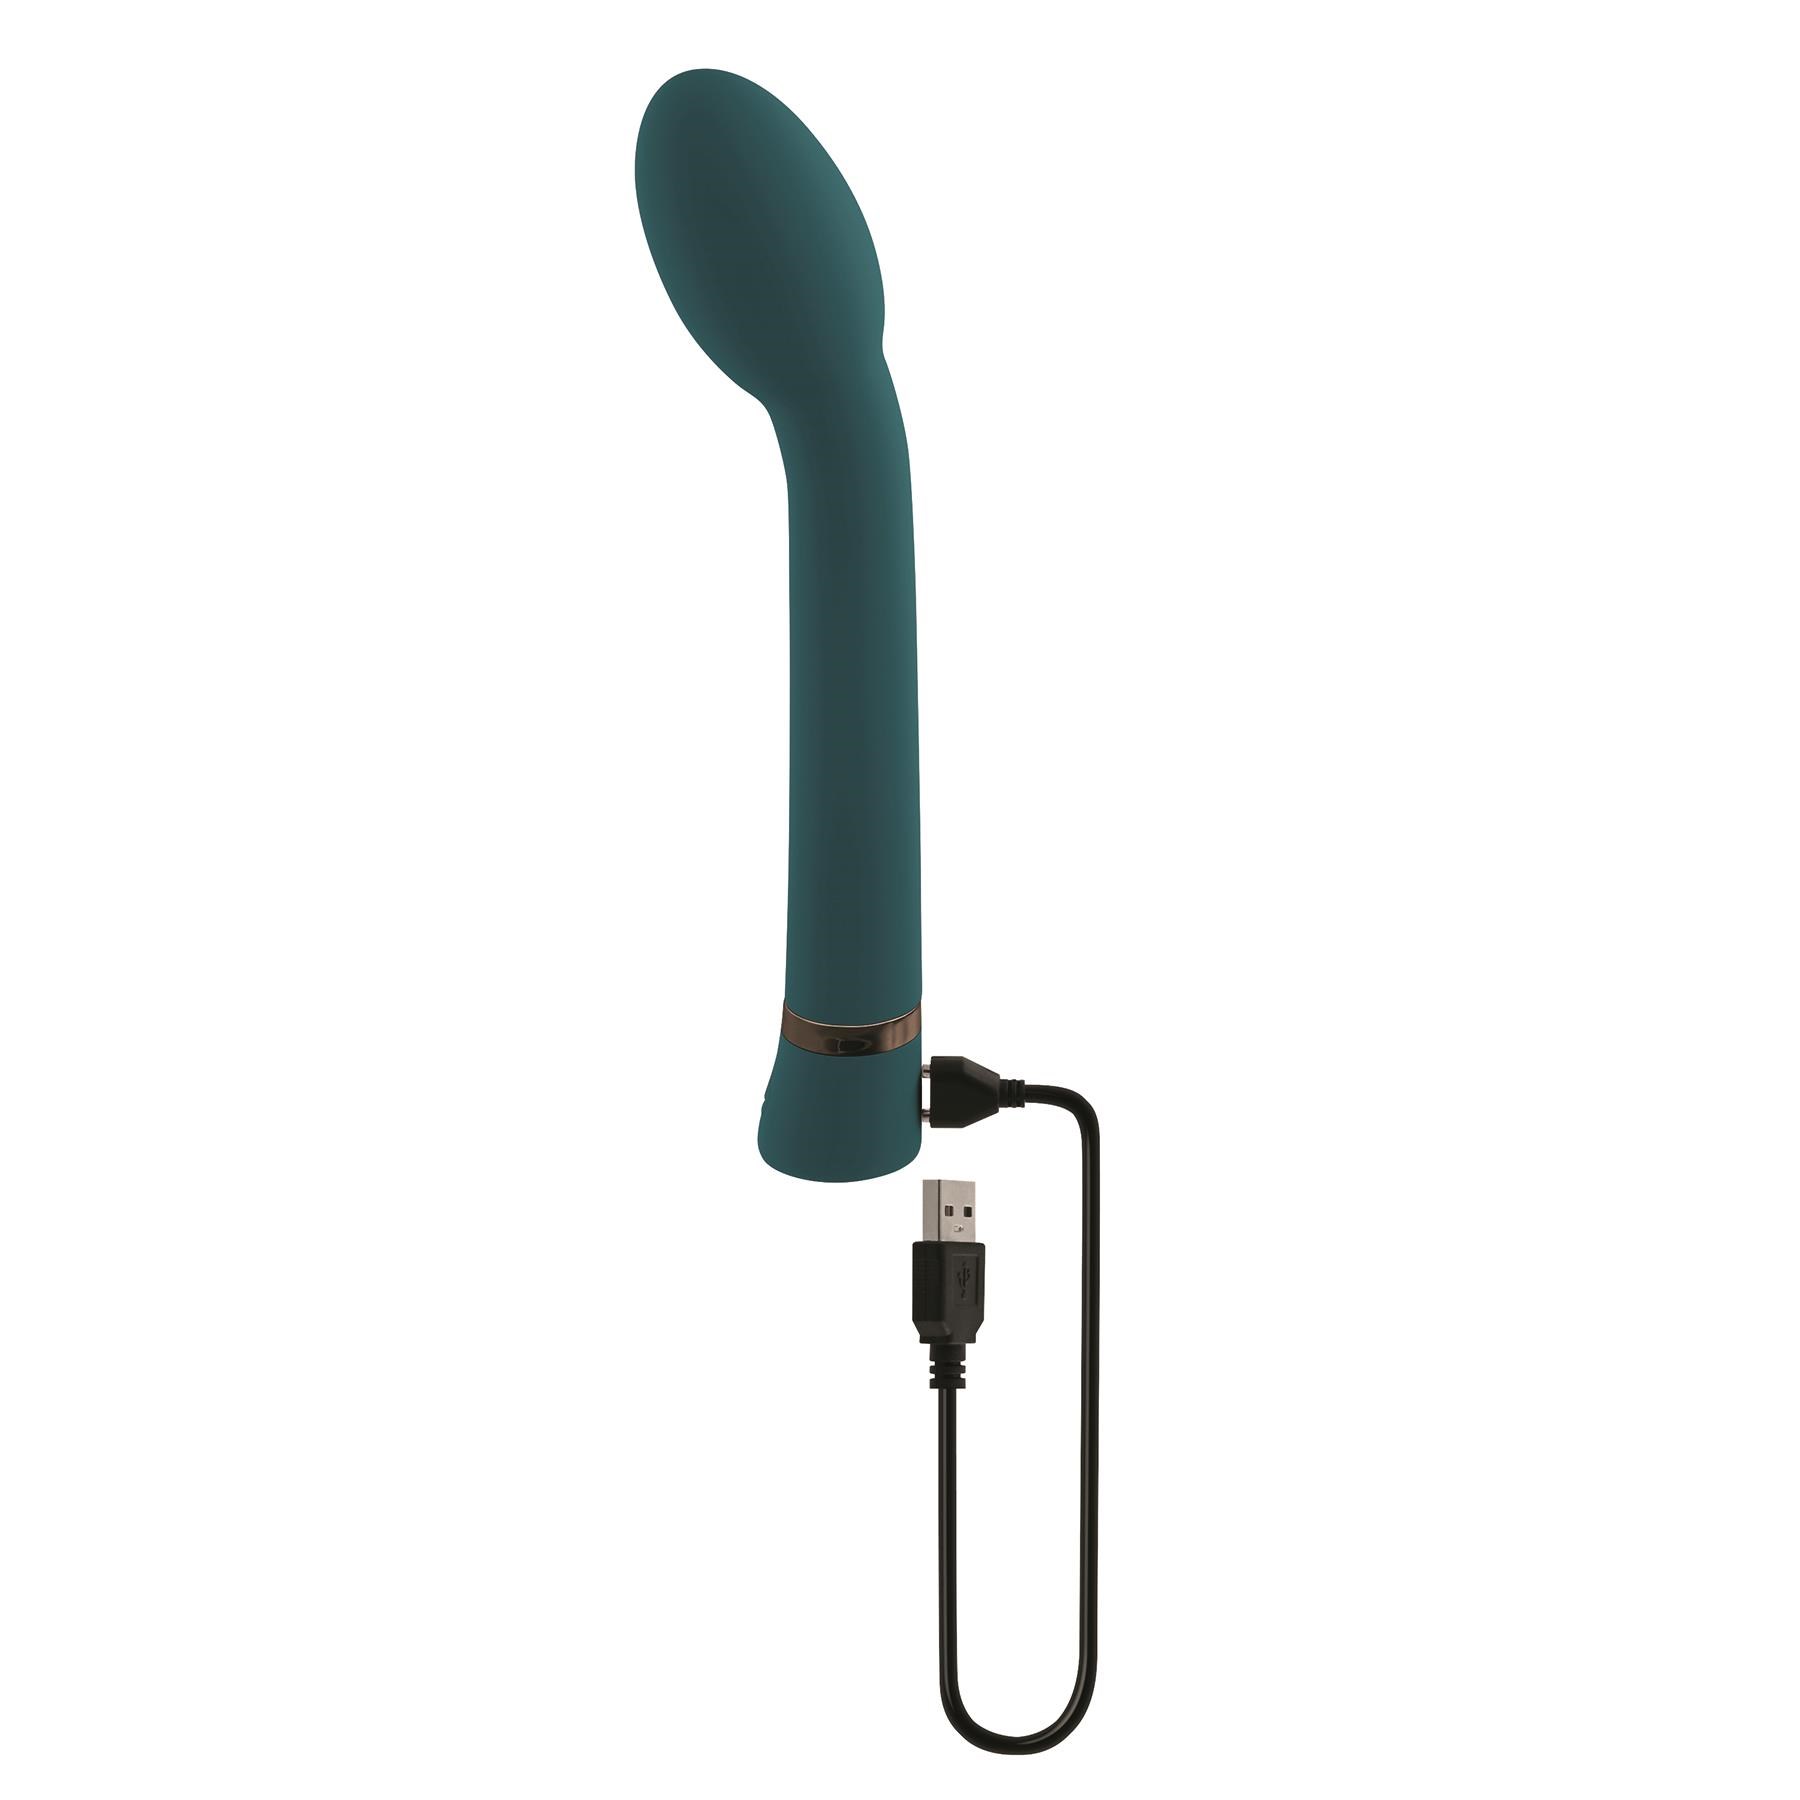 Playboy Pleasure On The Spot G-Spot Massager - Showing Where Charging Cable is Placed